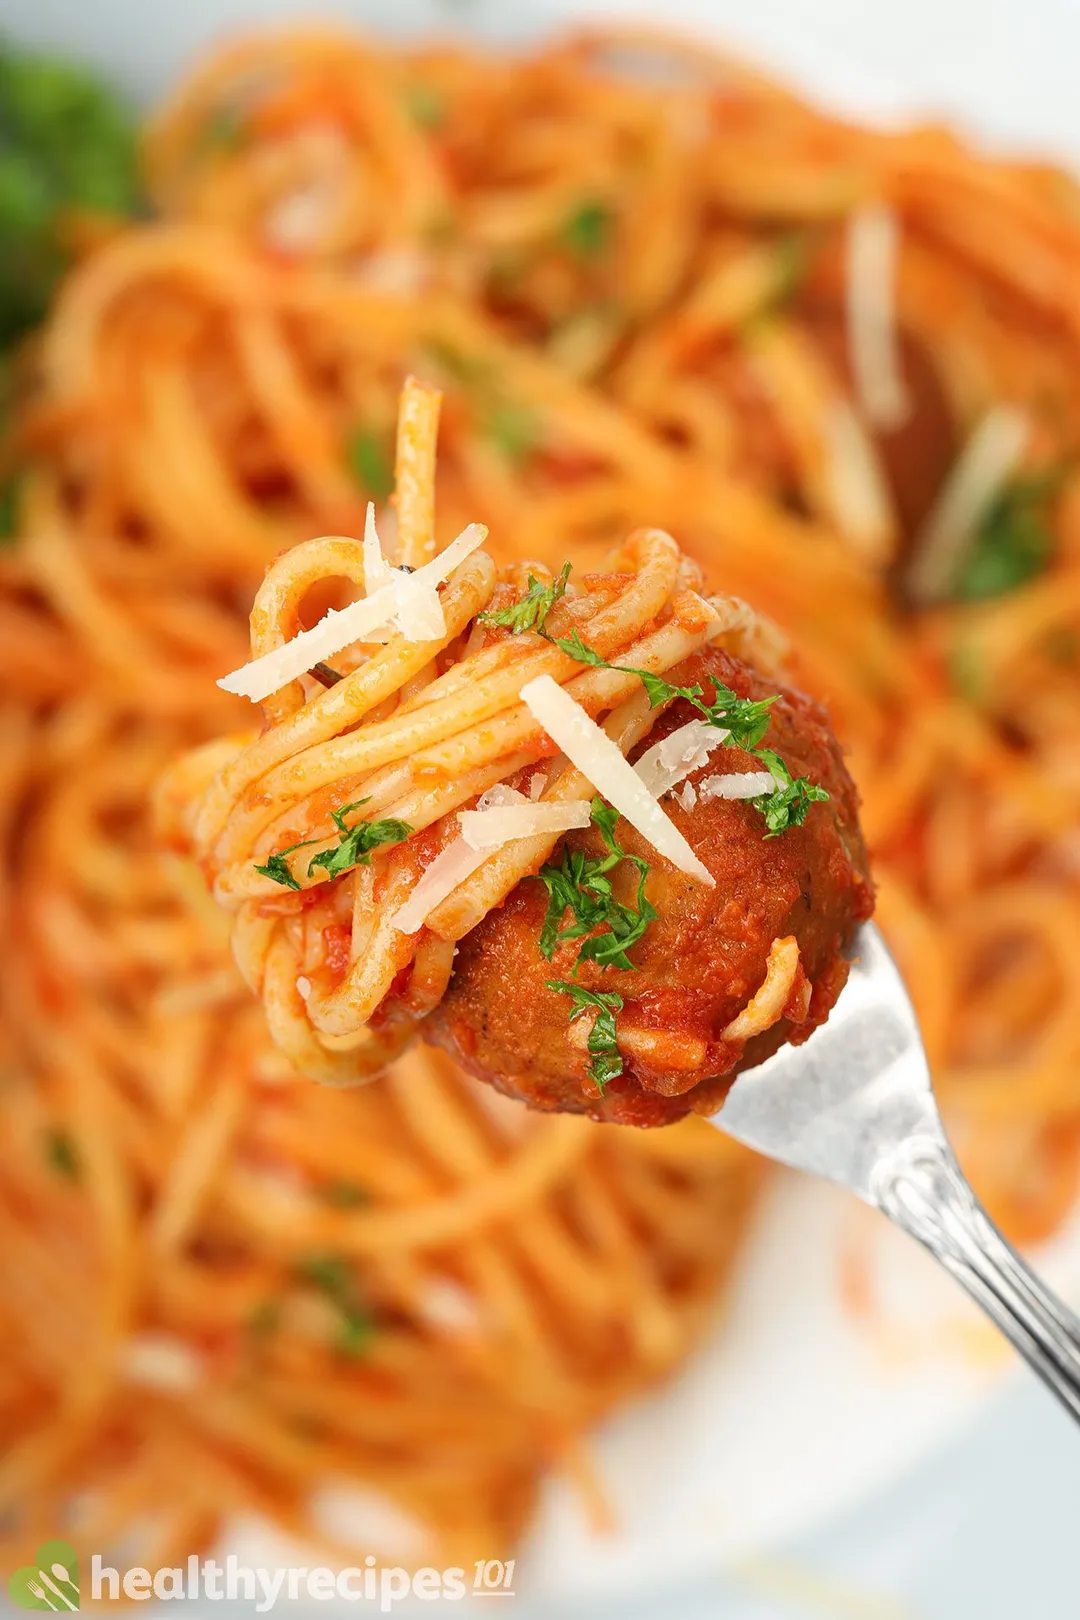 A fork piercing into a chickpea meatball wrapped in spaghetti pasta.